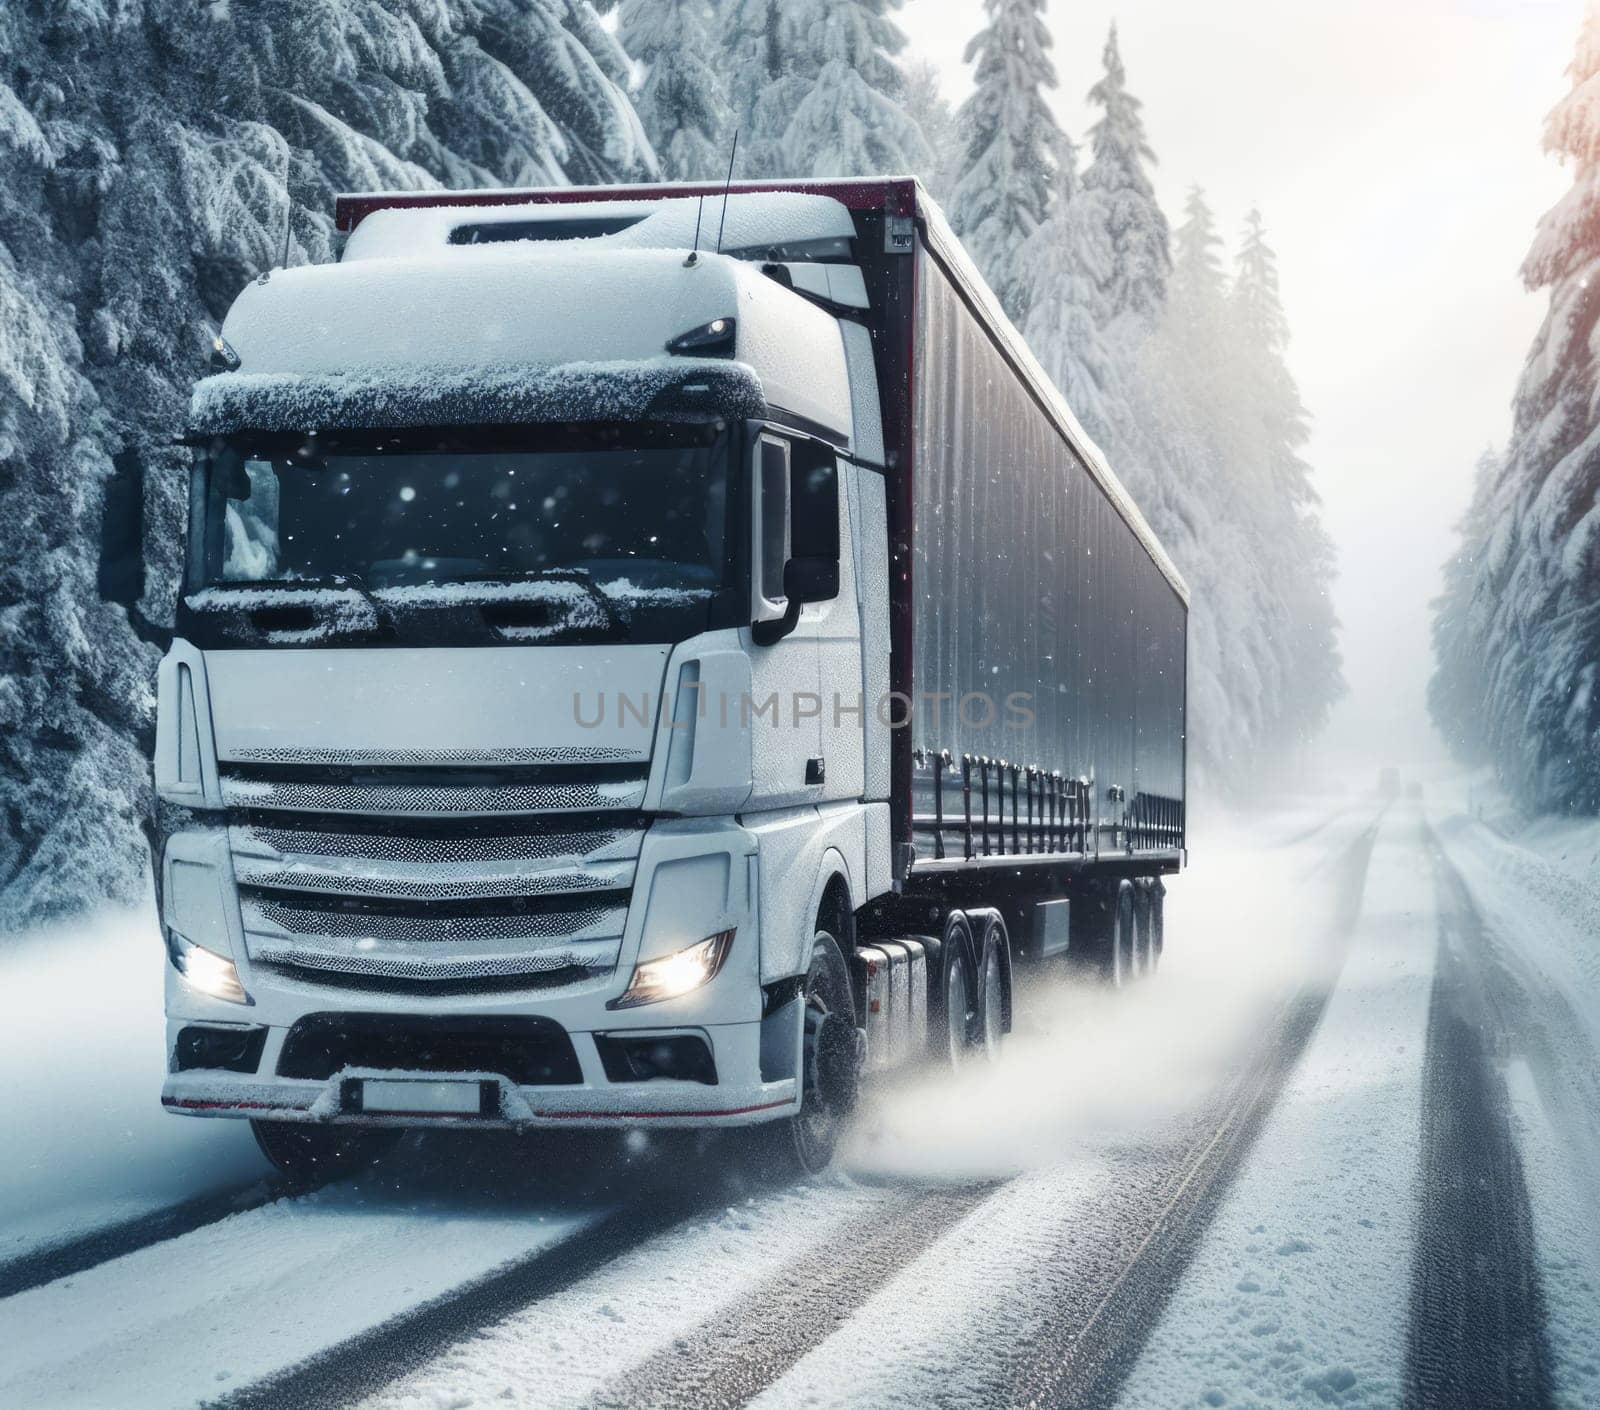 A white truck driving on a snowy road with trees on either side